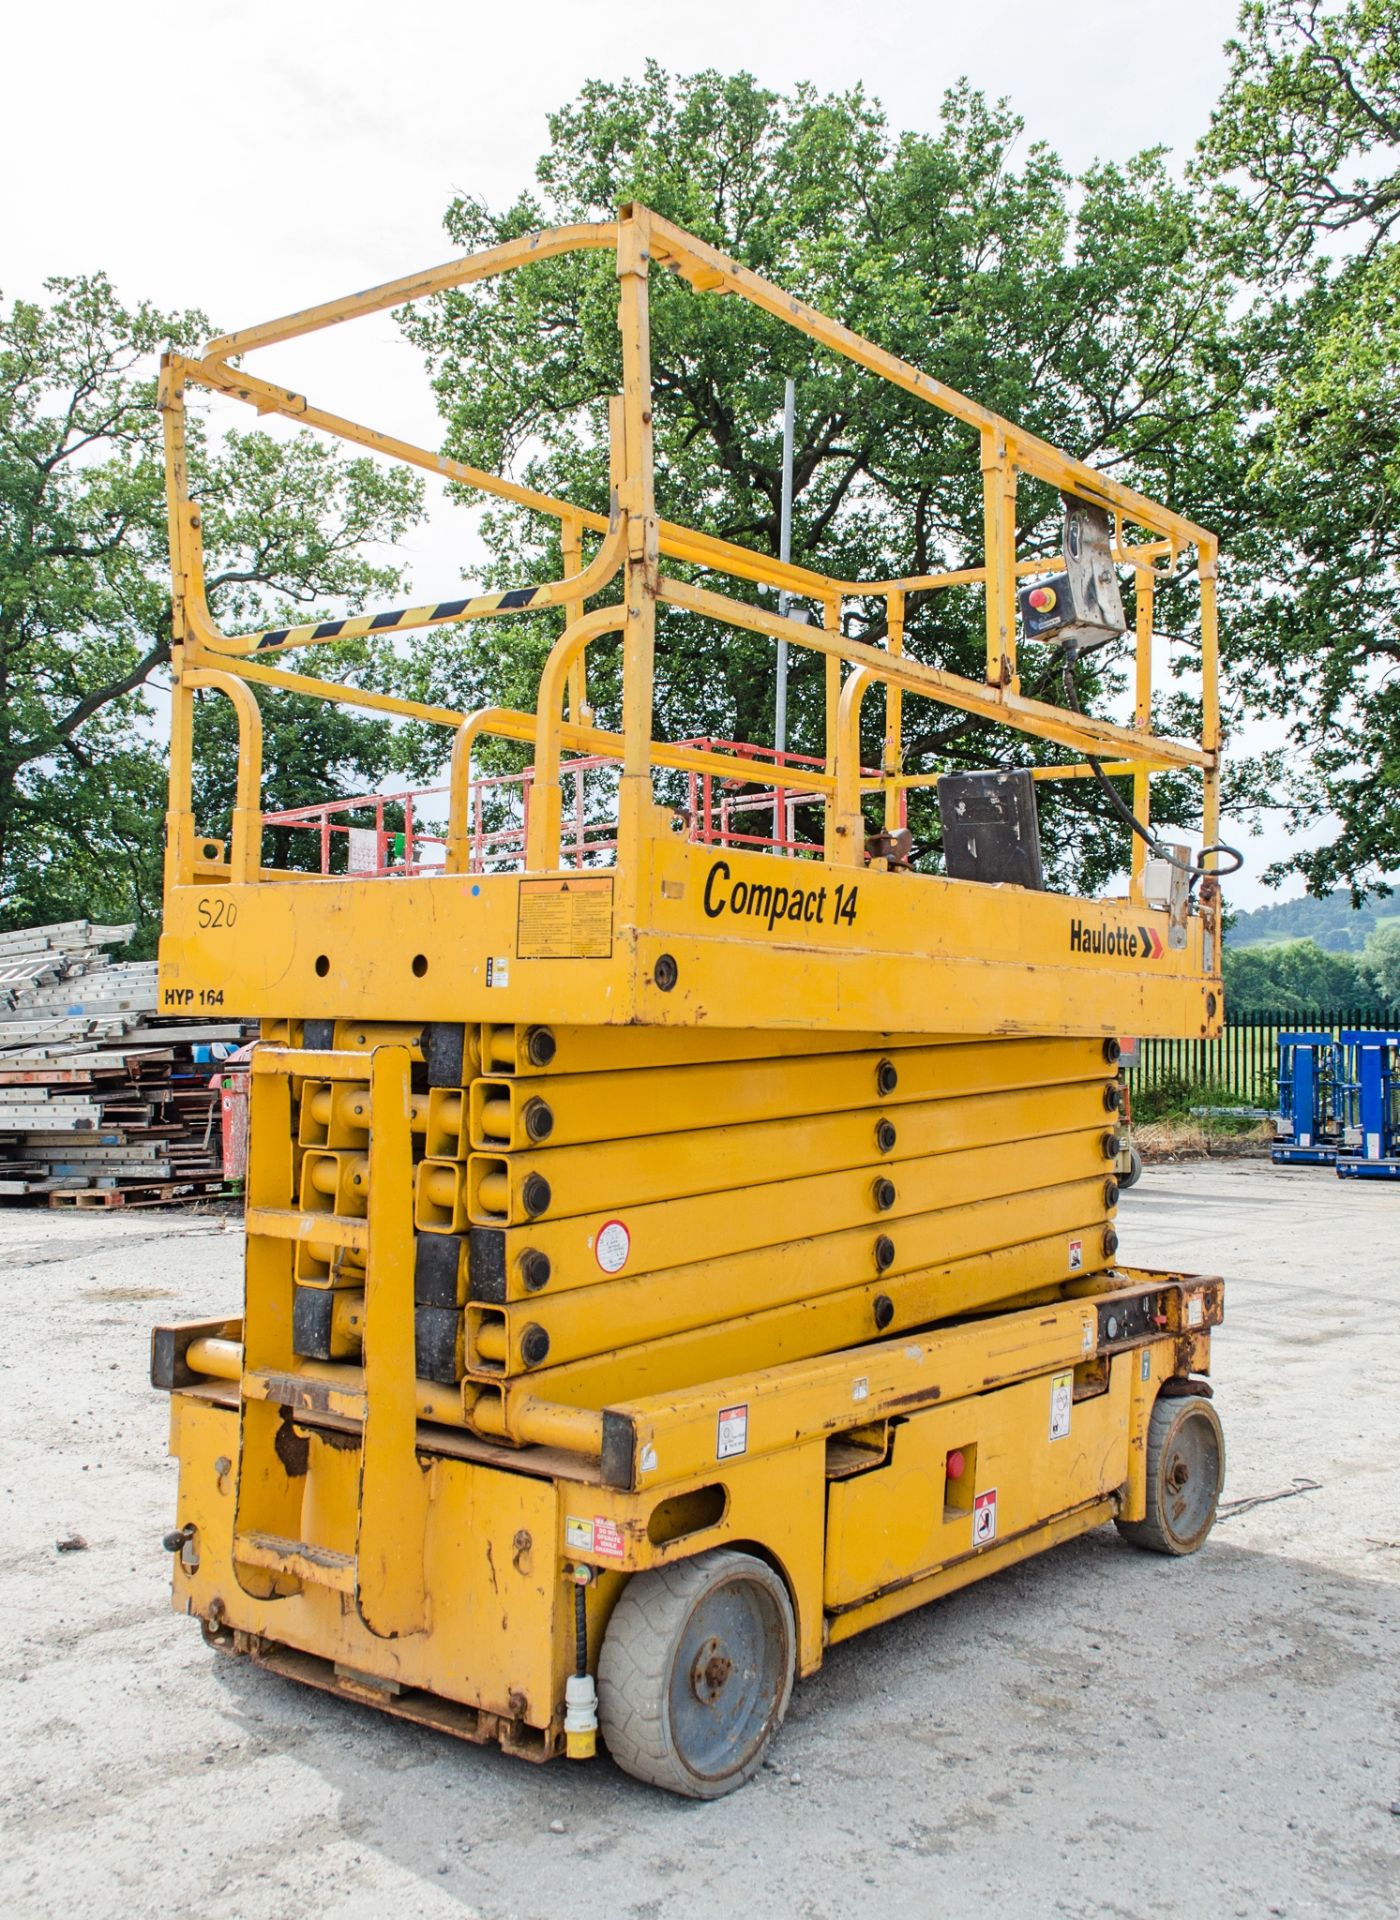 Haulotte Compact 14 battery electric scissor lift Year: 2010 S/N: CE143402 Recorded hours: 481